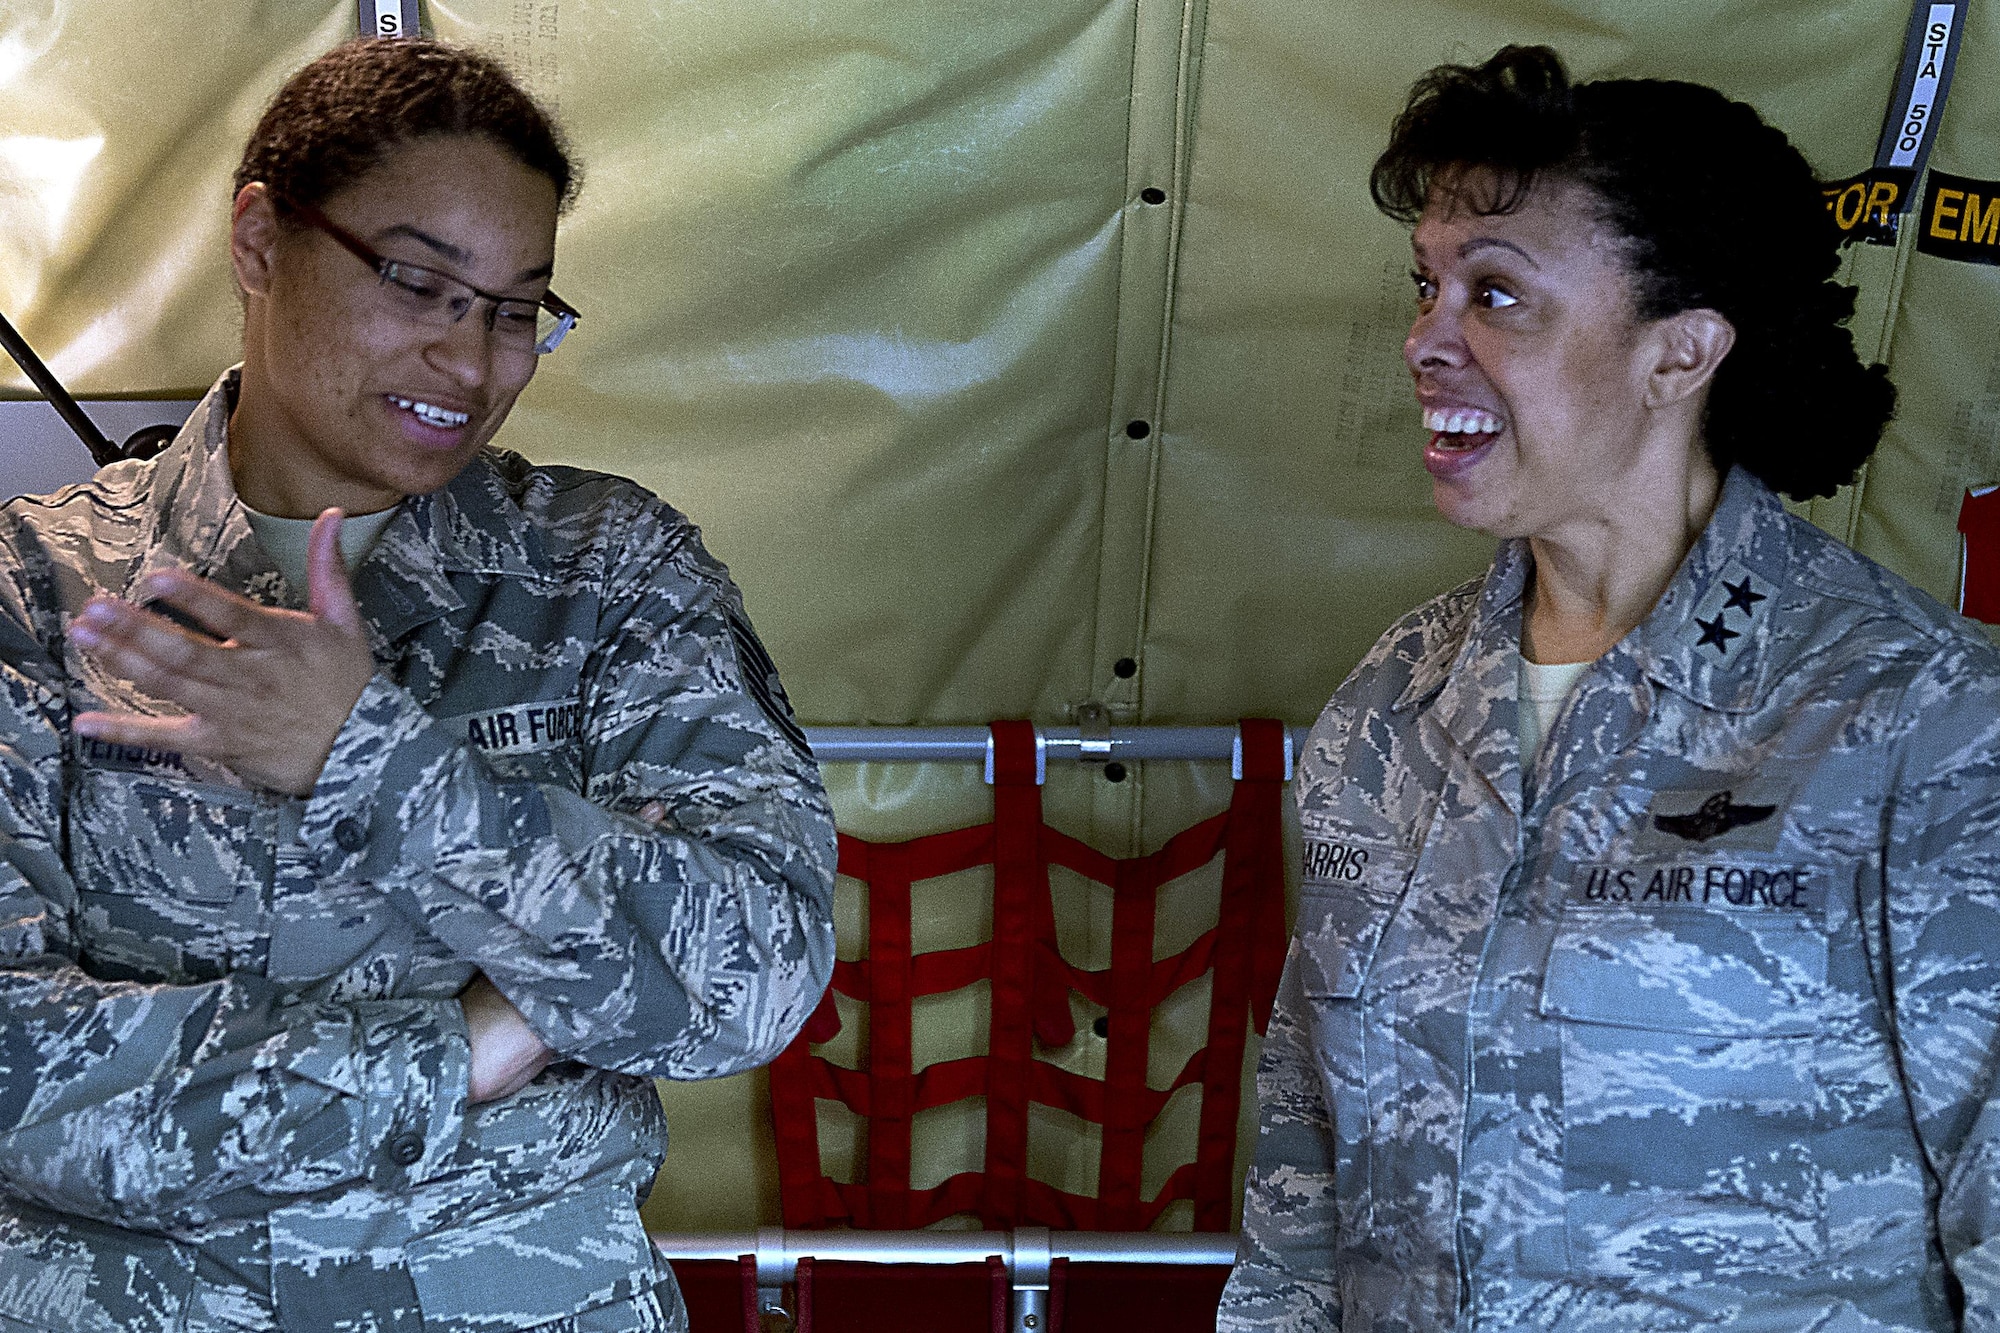 Tech. Sgt. Julia Person, 434th Aircraft Maintenance Squadron, tells Maj. Gen. Stayce Harris, 22nd Air Force commander, about her experience working with the KC-135R Stratotanker April 12, 2016 at Grissom Air Reserve Base, Ind. Harris interacted with several Airmen during her visit, taking time to talk to and get to know each of them personally. (U.S. Air Force photo/Senior Airman Dakota Bergl)